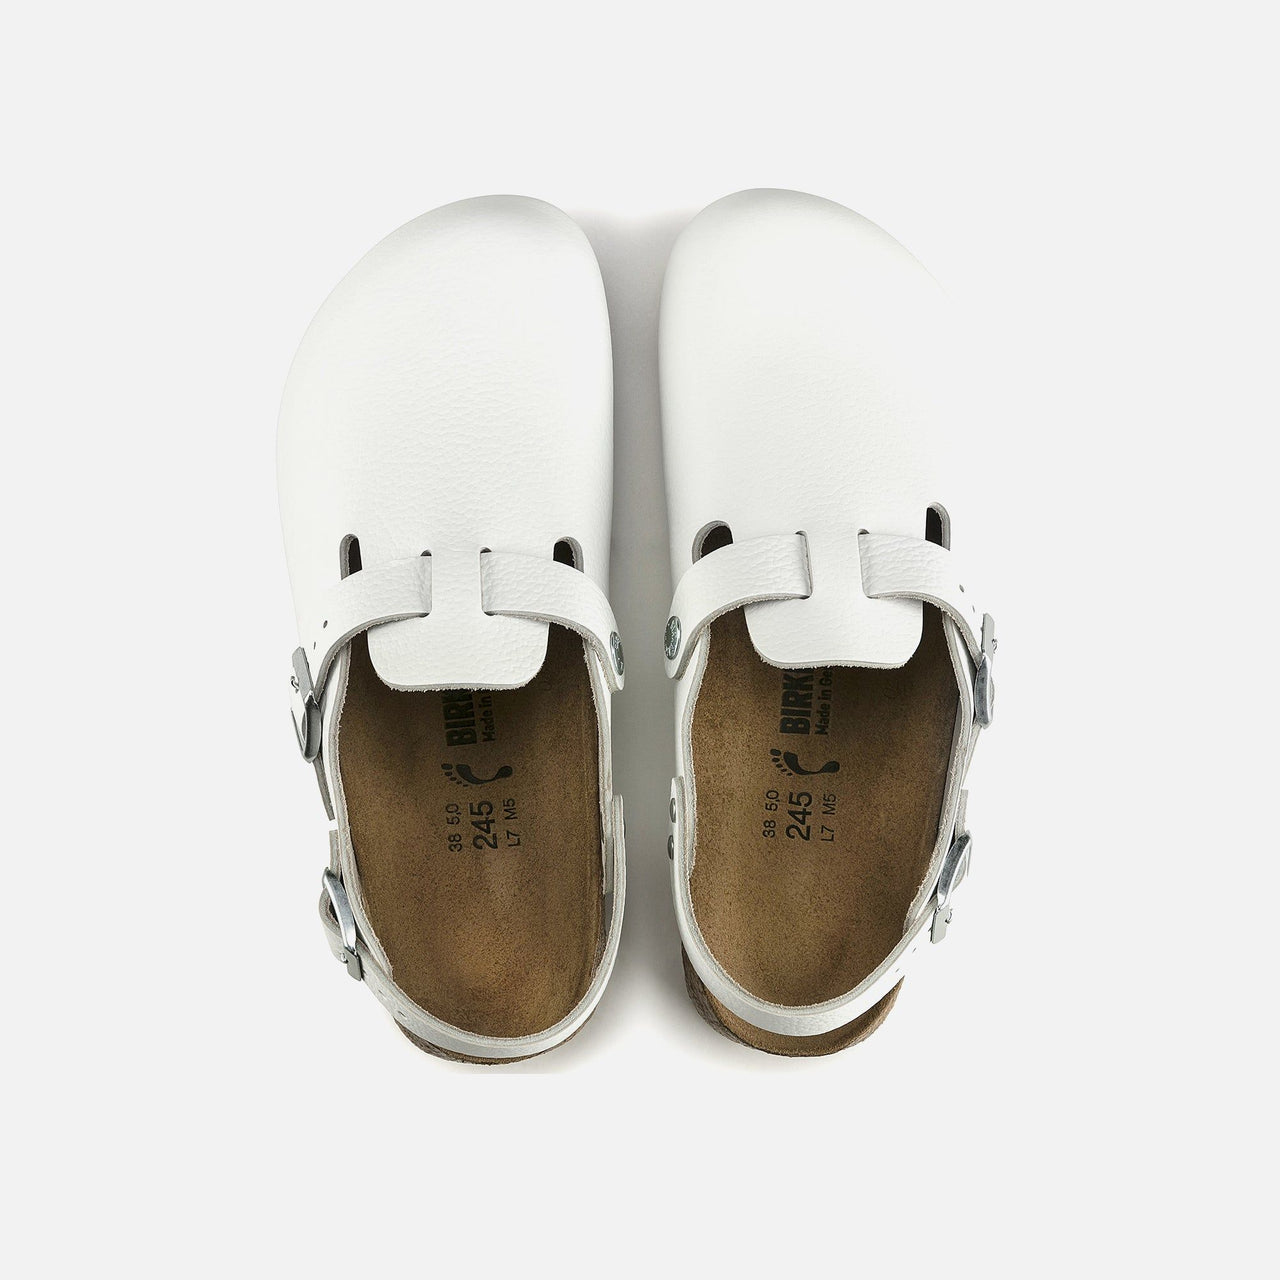 A close-up image of the Birkenstock Tokio Supergrip White, a durable and comfortable work shoe designed for all-day wear in professional environments